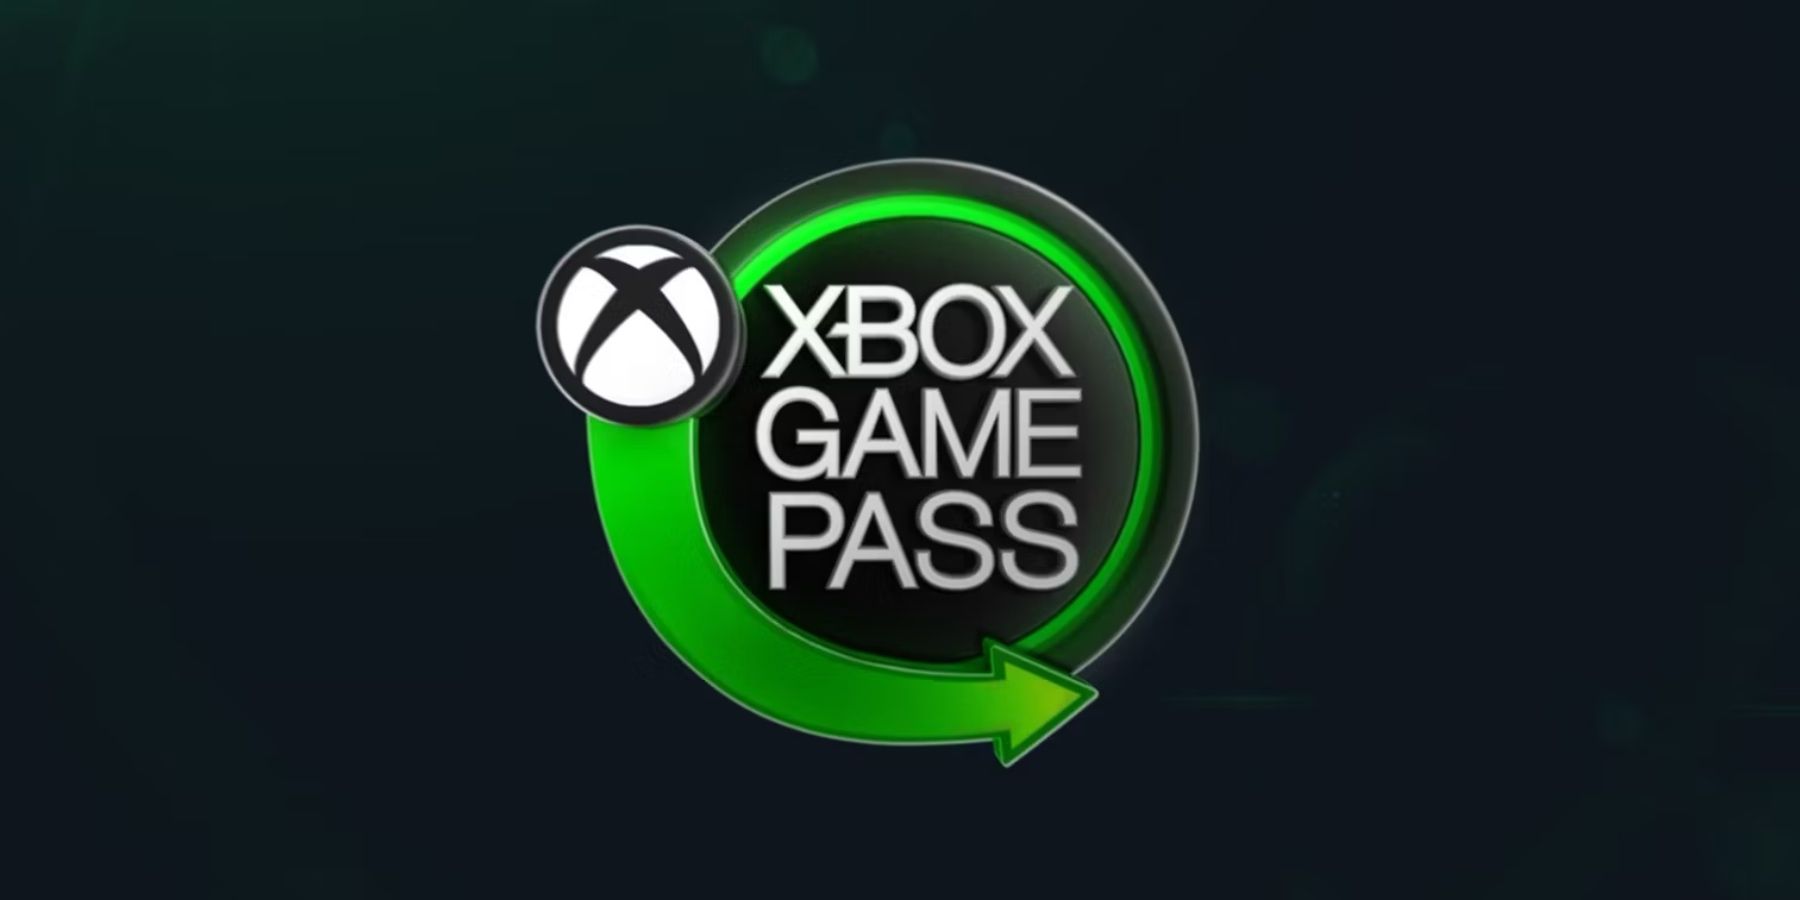 amazon, microsoft, day one xbox game pass game skipping consoles at launch